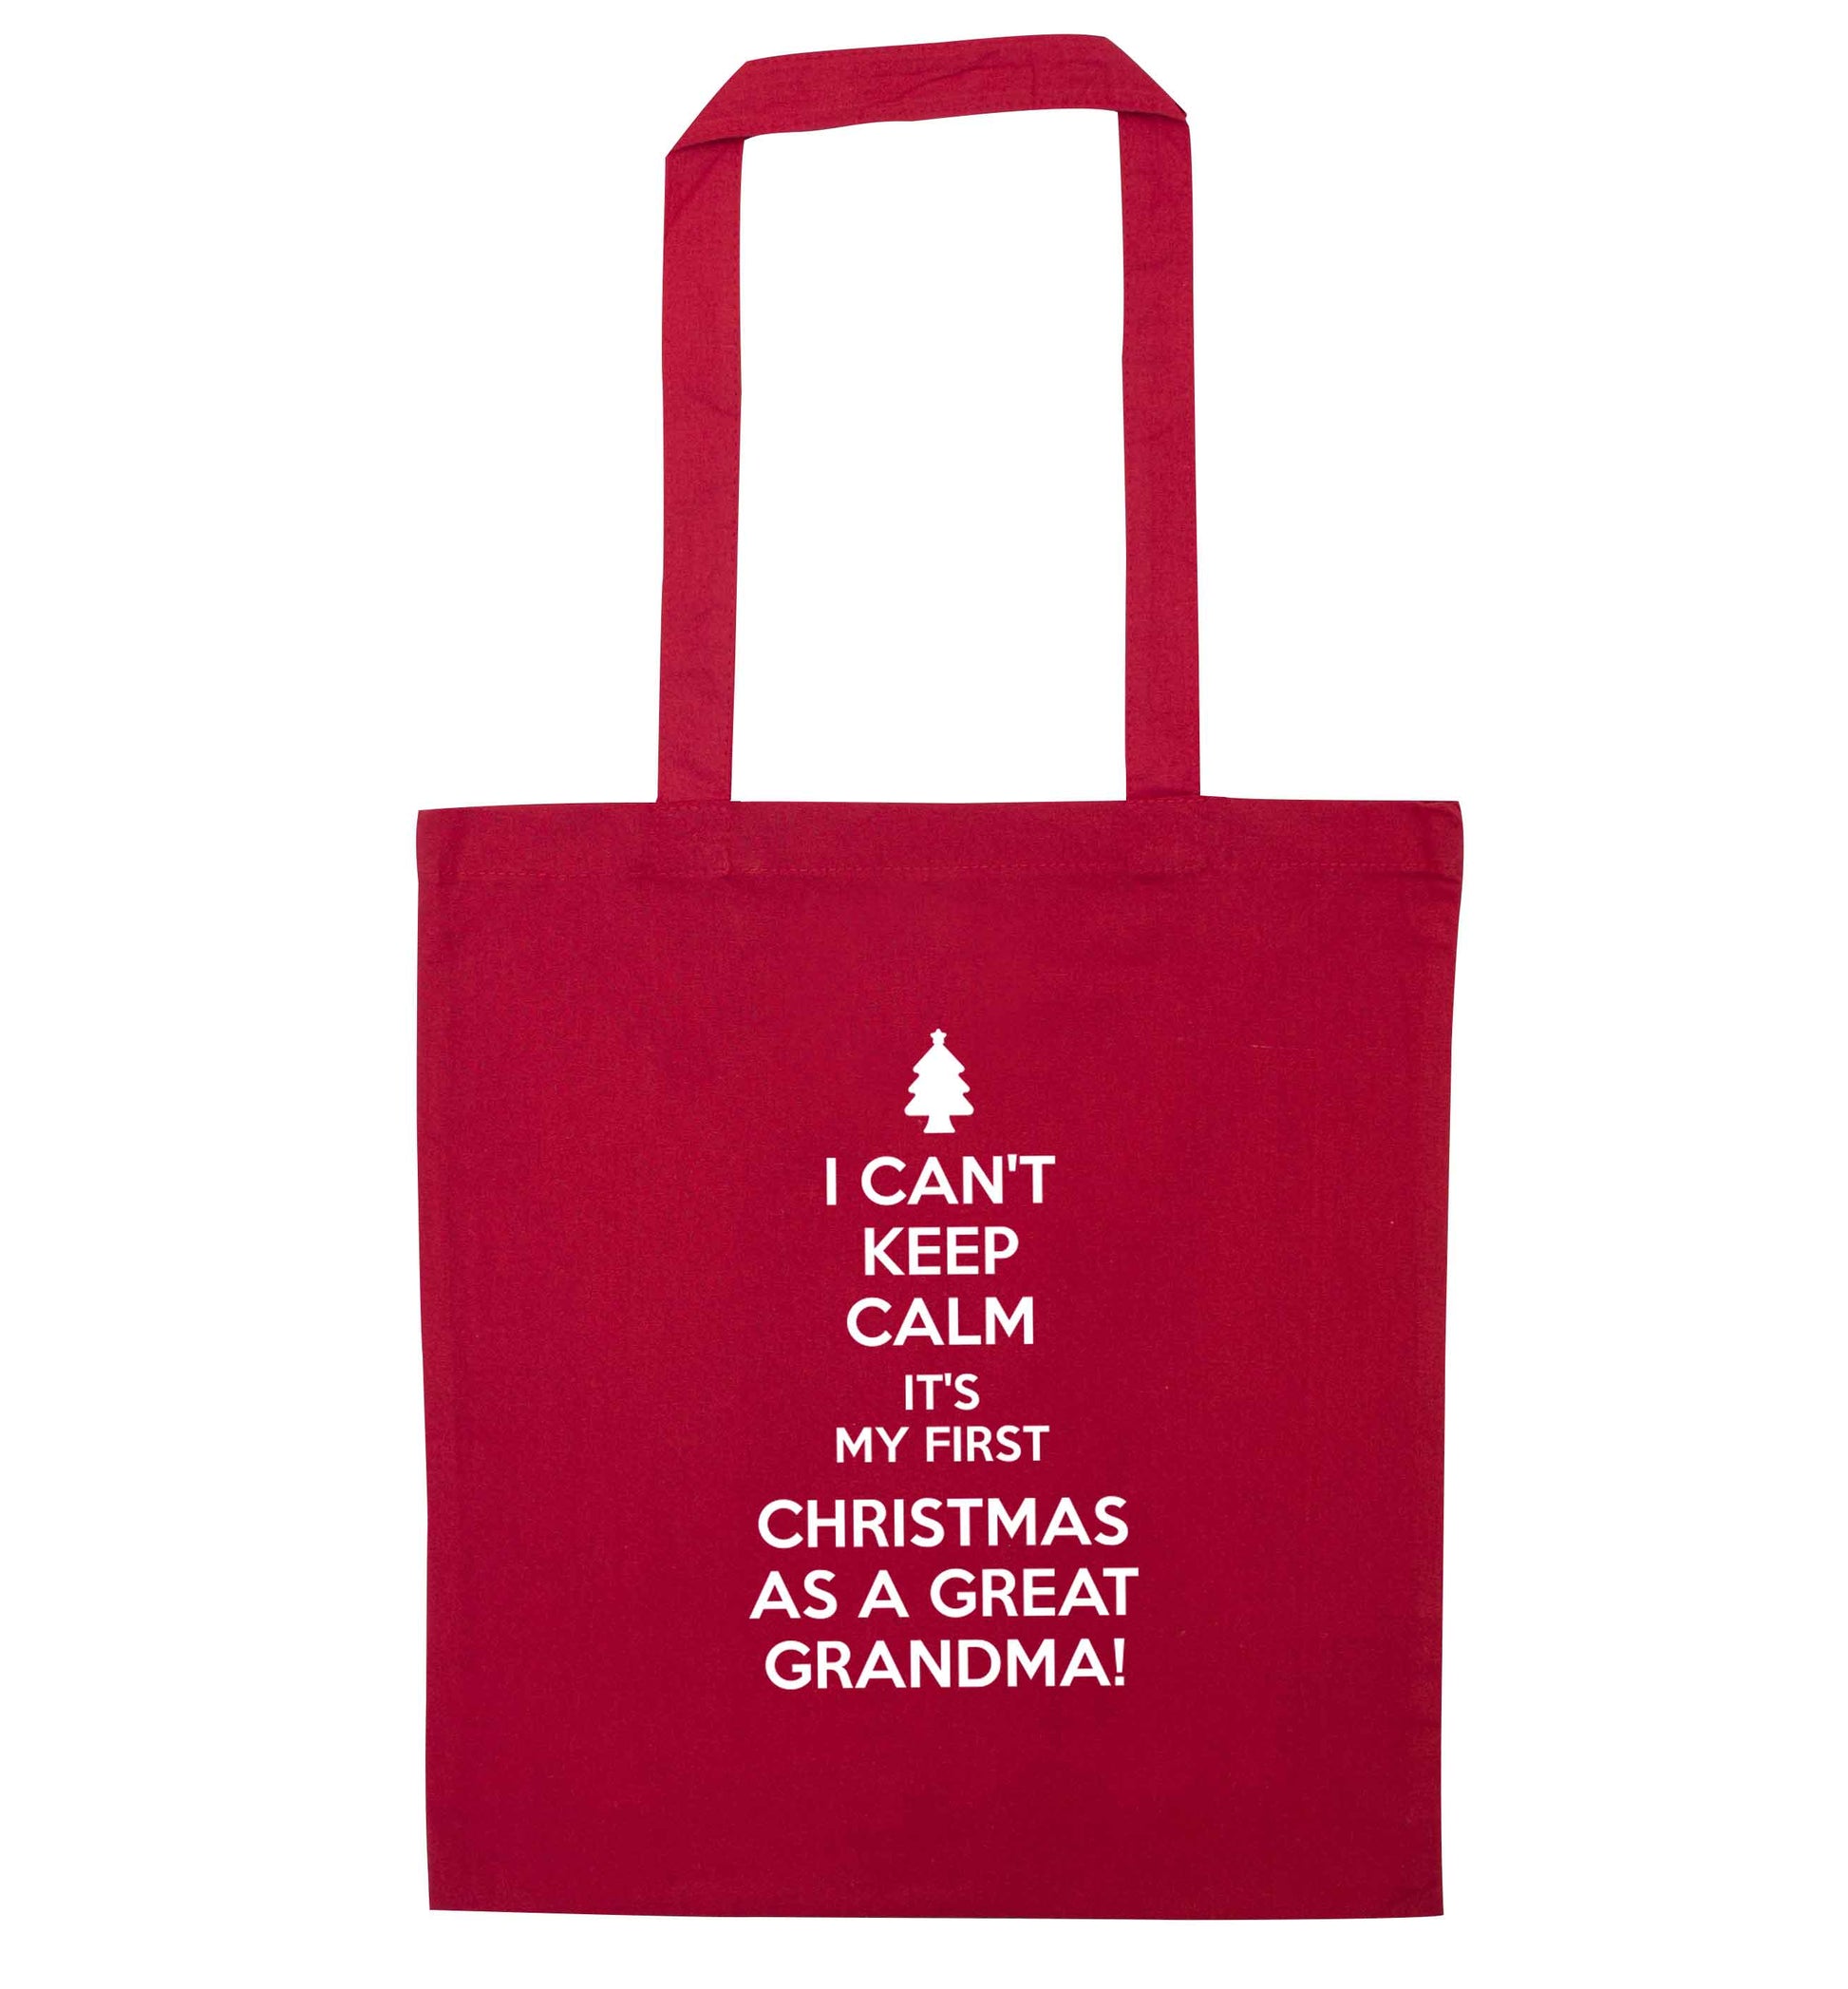 I can't keep calm it's my first Christmas as a great grandma! red tote bag